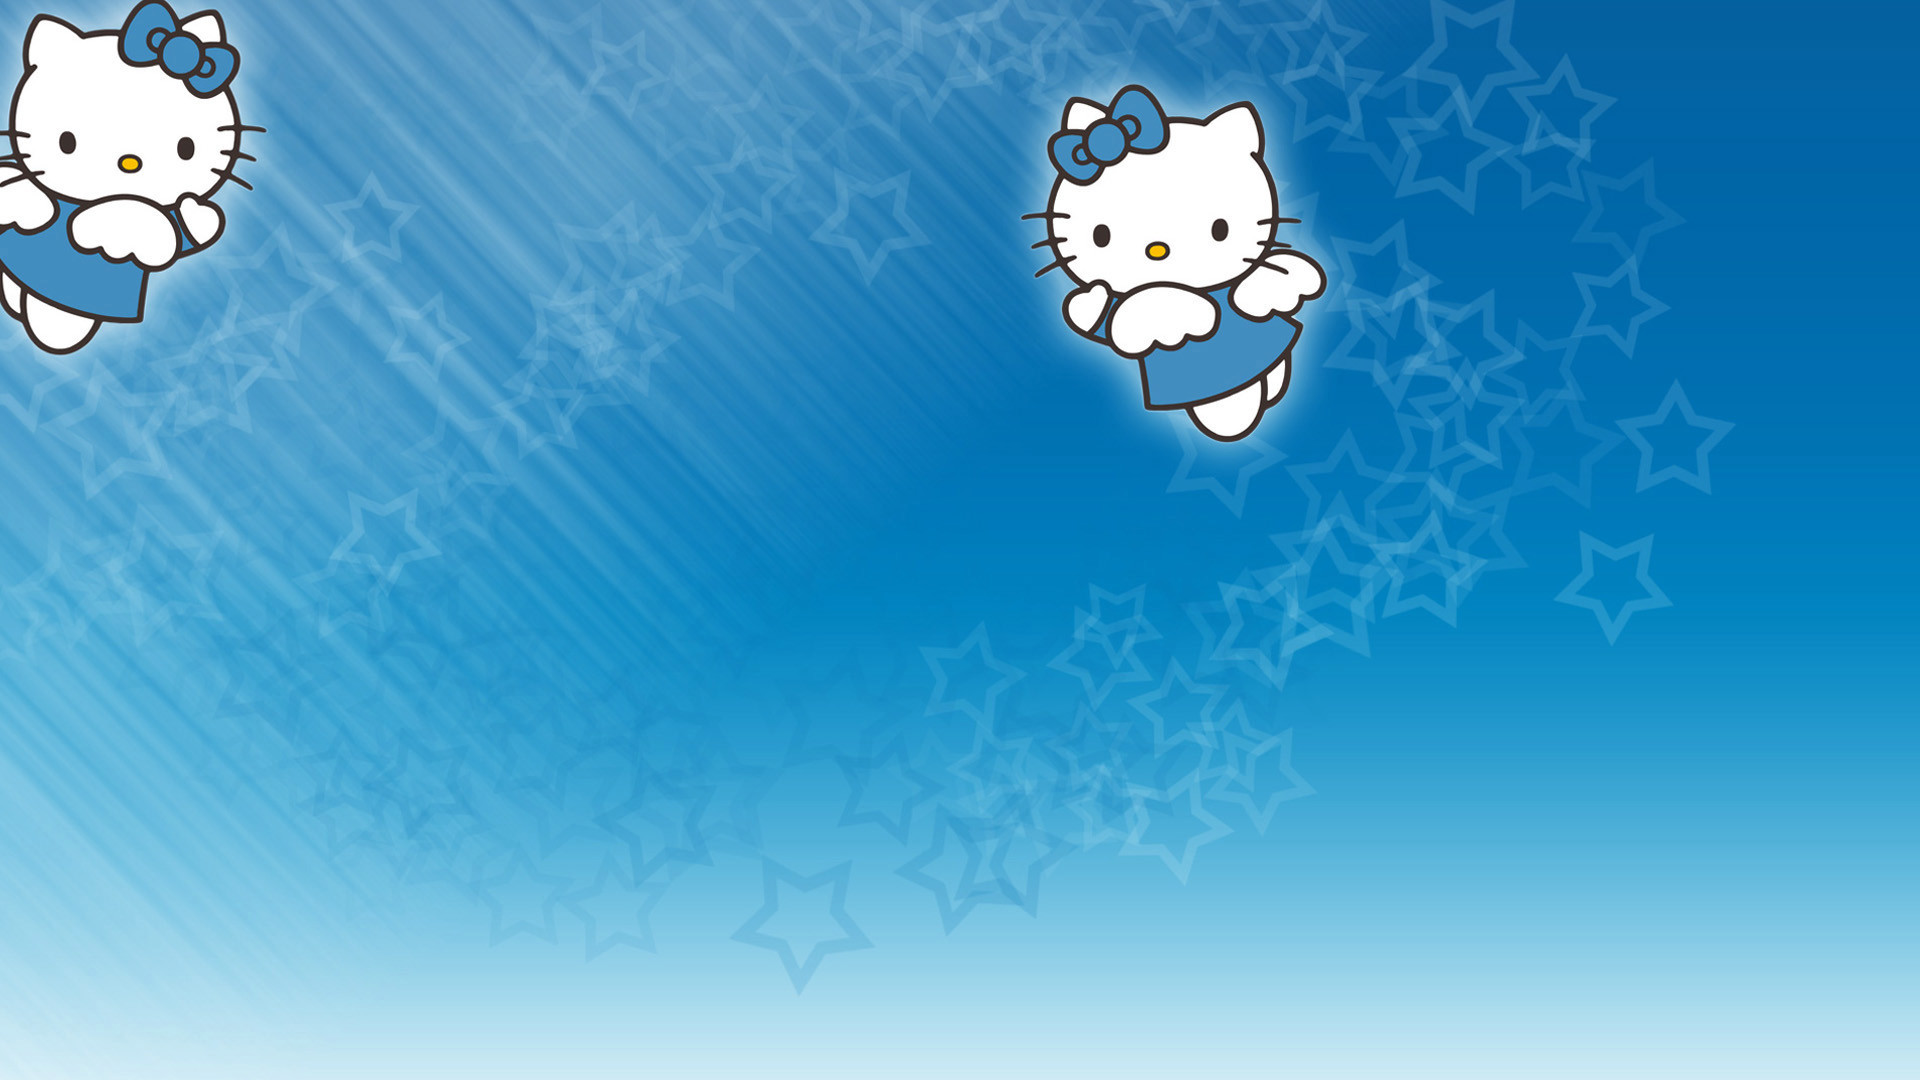 1920x1080 pretty blue backgrounds | blue, hello, kitty, background, cute, backgrounds,